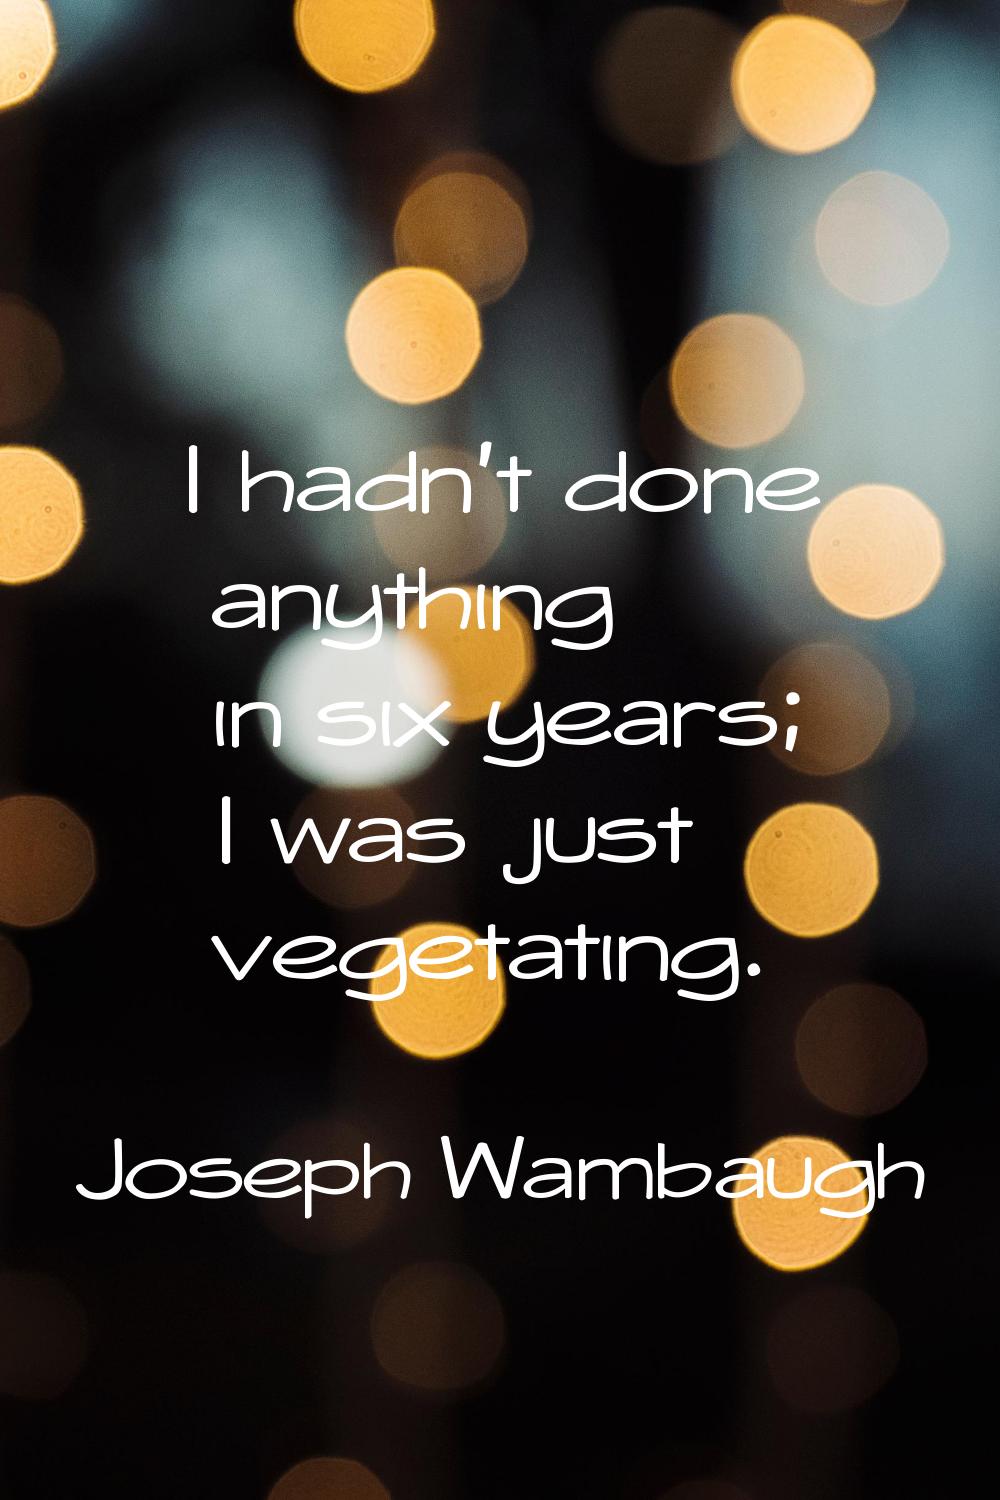 I hadn't done anything in six years; I was just vegetating.